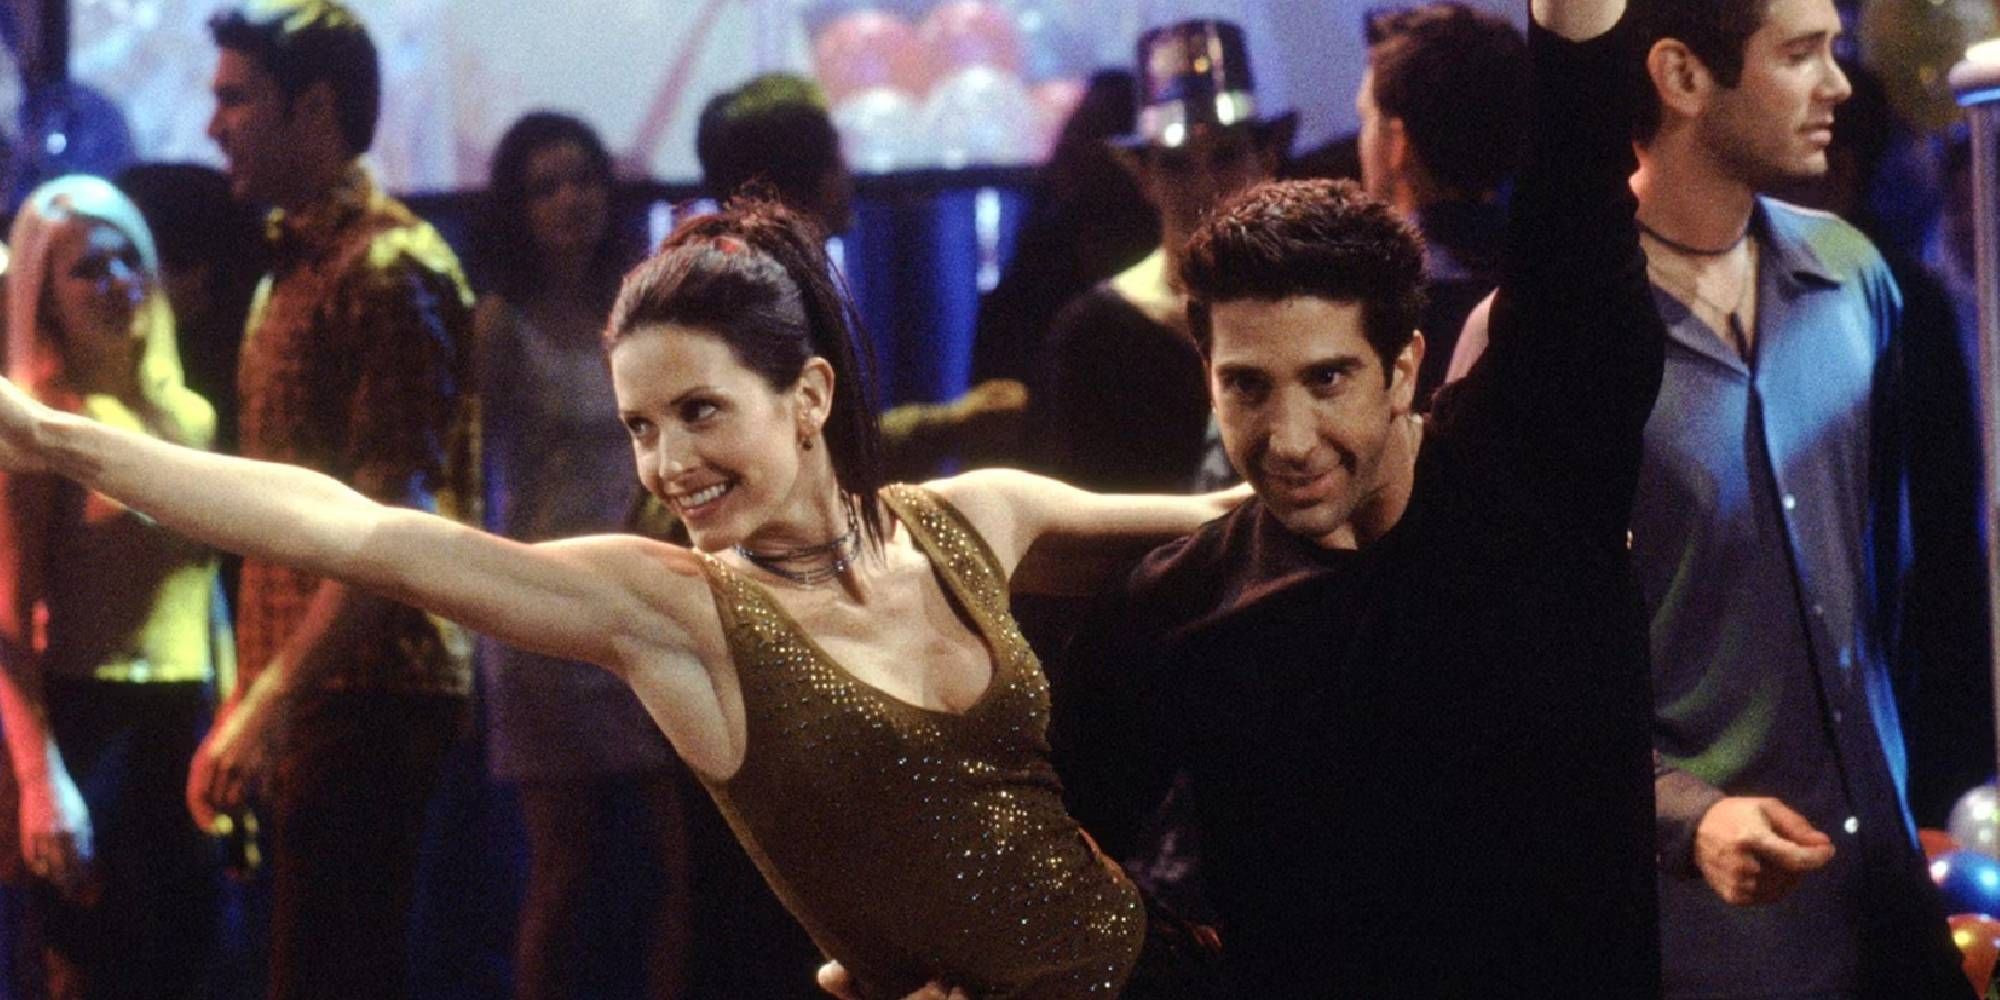 Courteney Cox and David Schwimmer as Monica and Ross dancing in Friends.